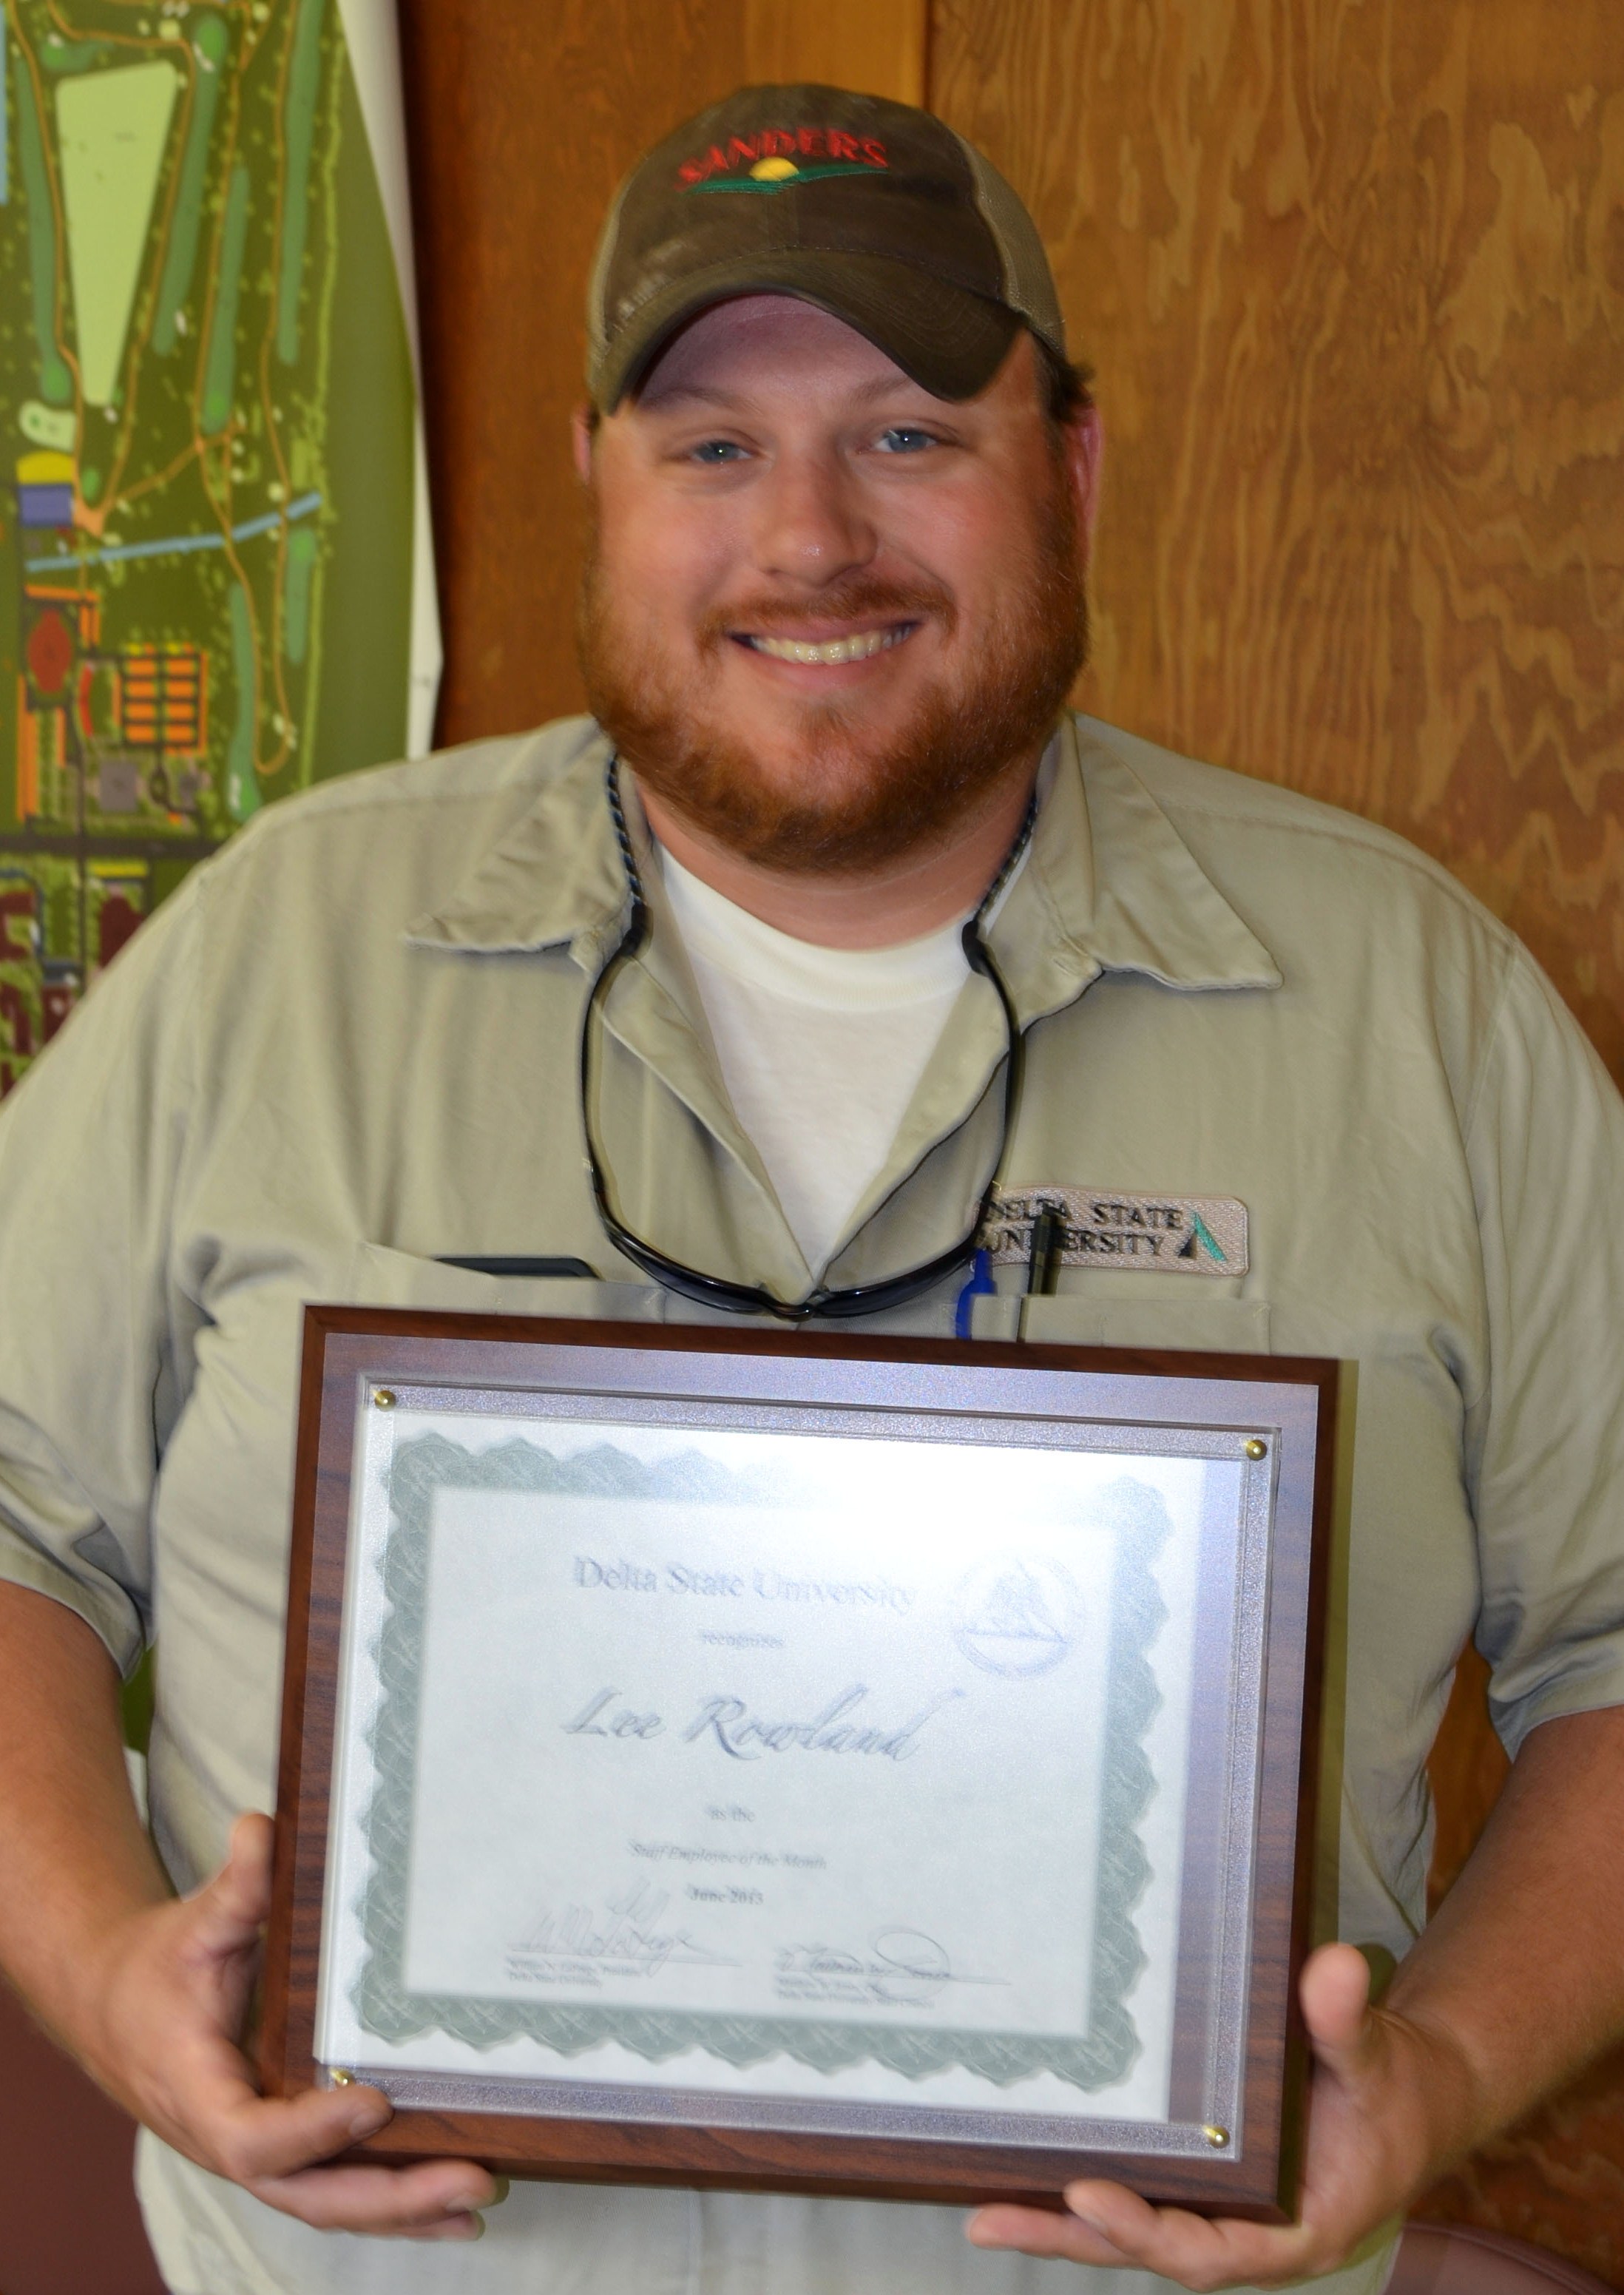 Rowland receives recognition for exceptional service to Delta State.